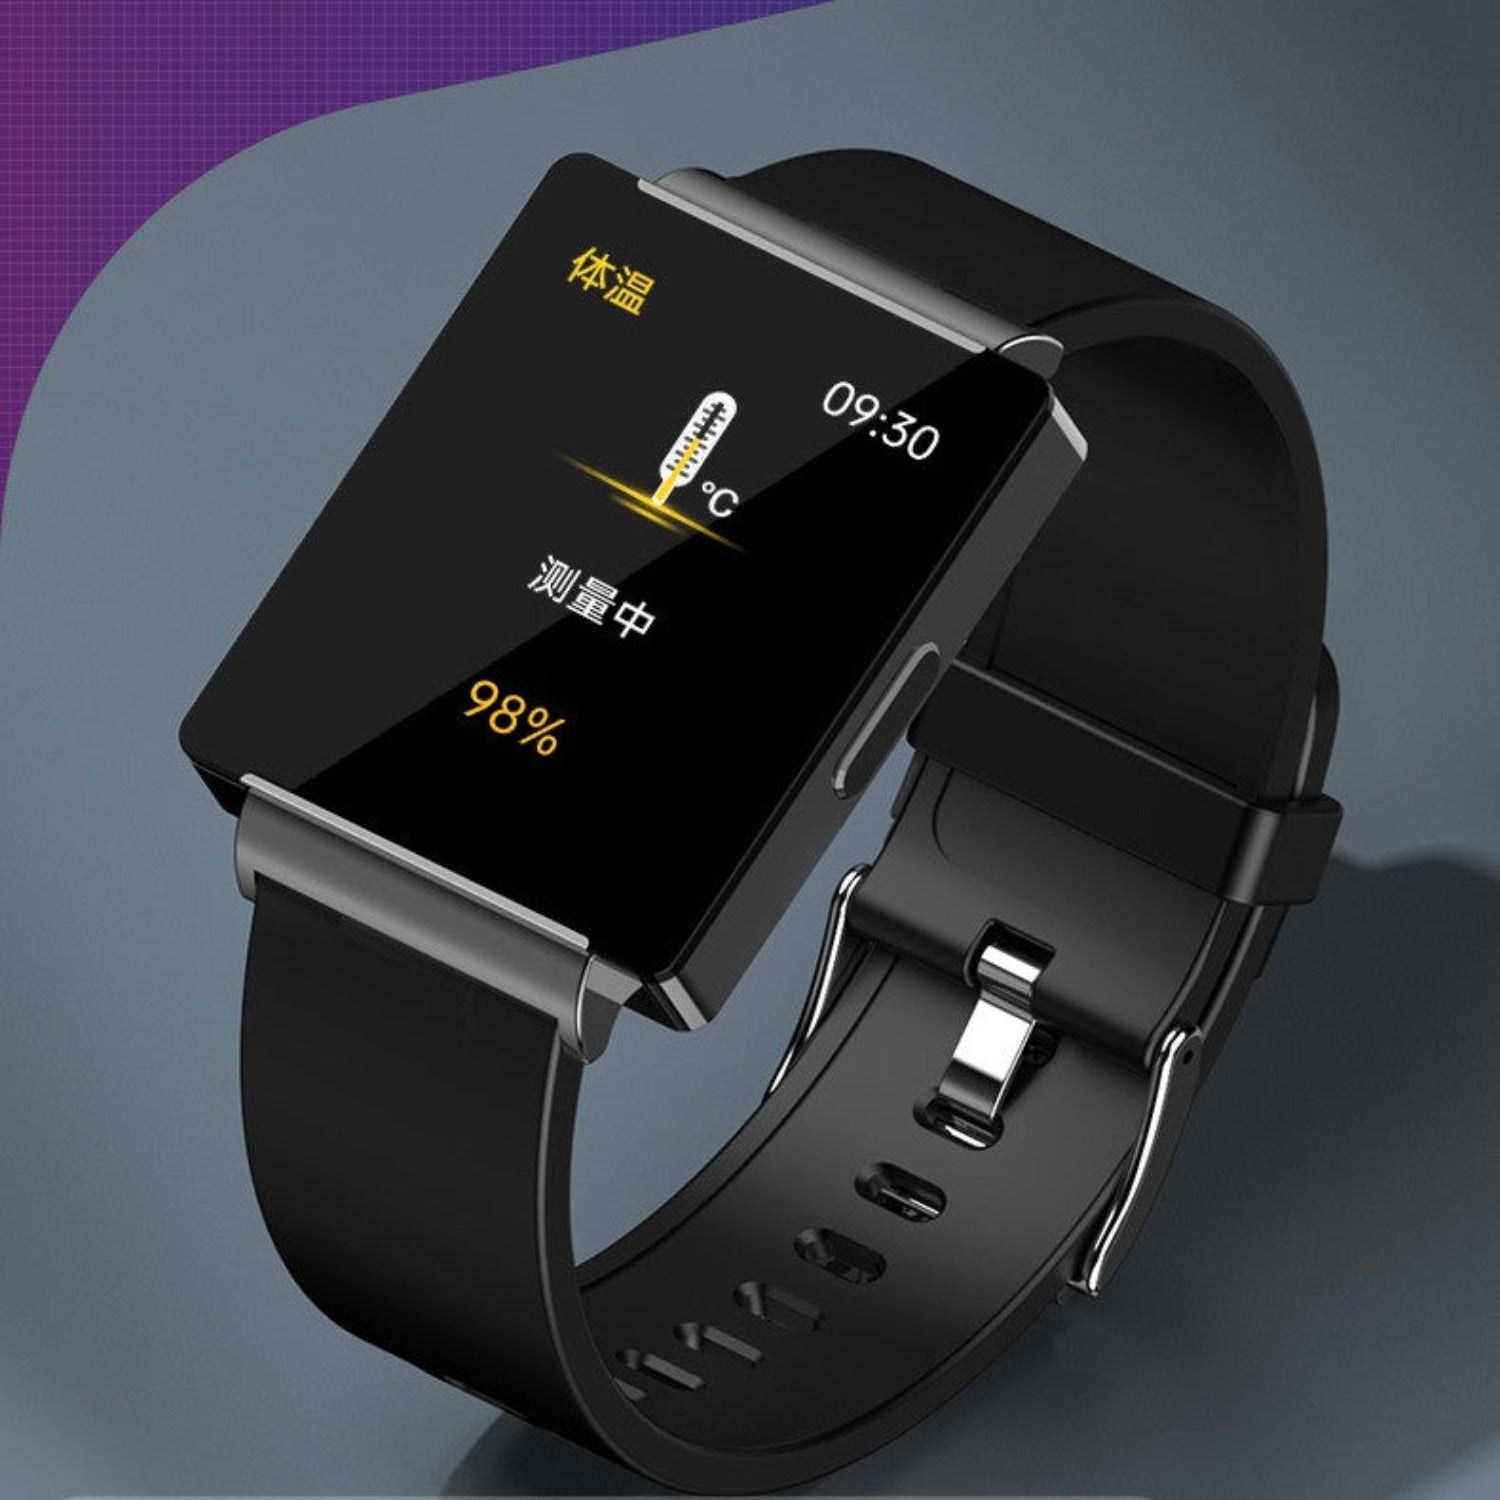 Smart Watch: Comprehensive Health Monitoring with Body Temperature, Blood Sugar, and Heart Rate Tracking LA ROSE BEAUTY